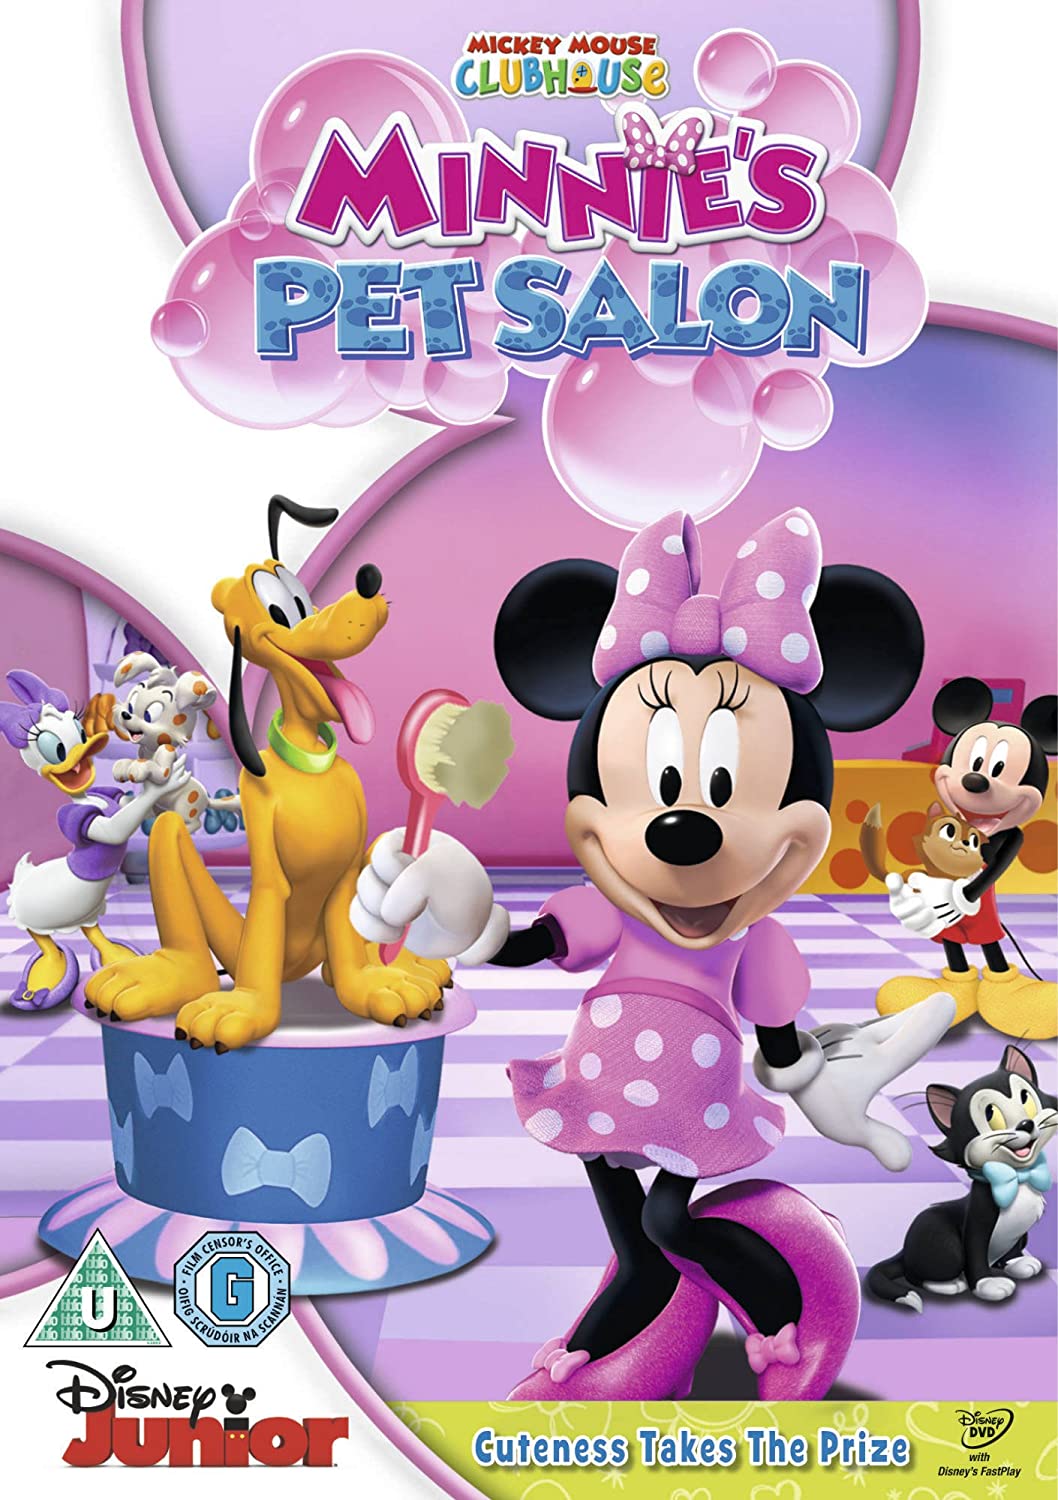 Mickey Mouse Club House: Minnies Haustiersalon